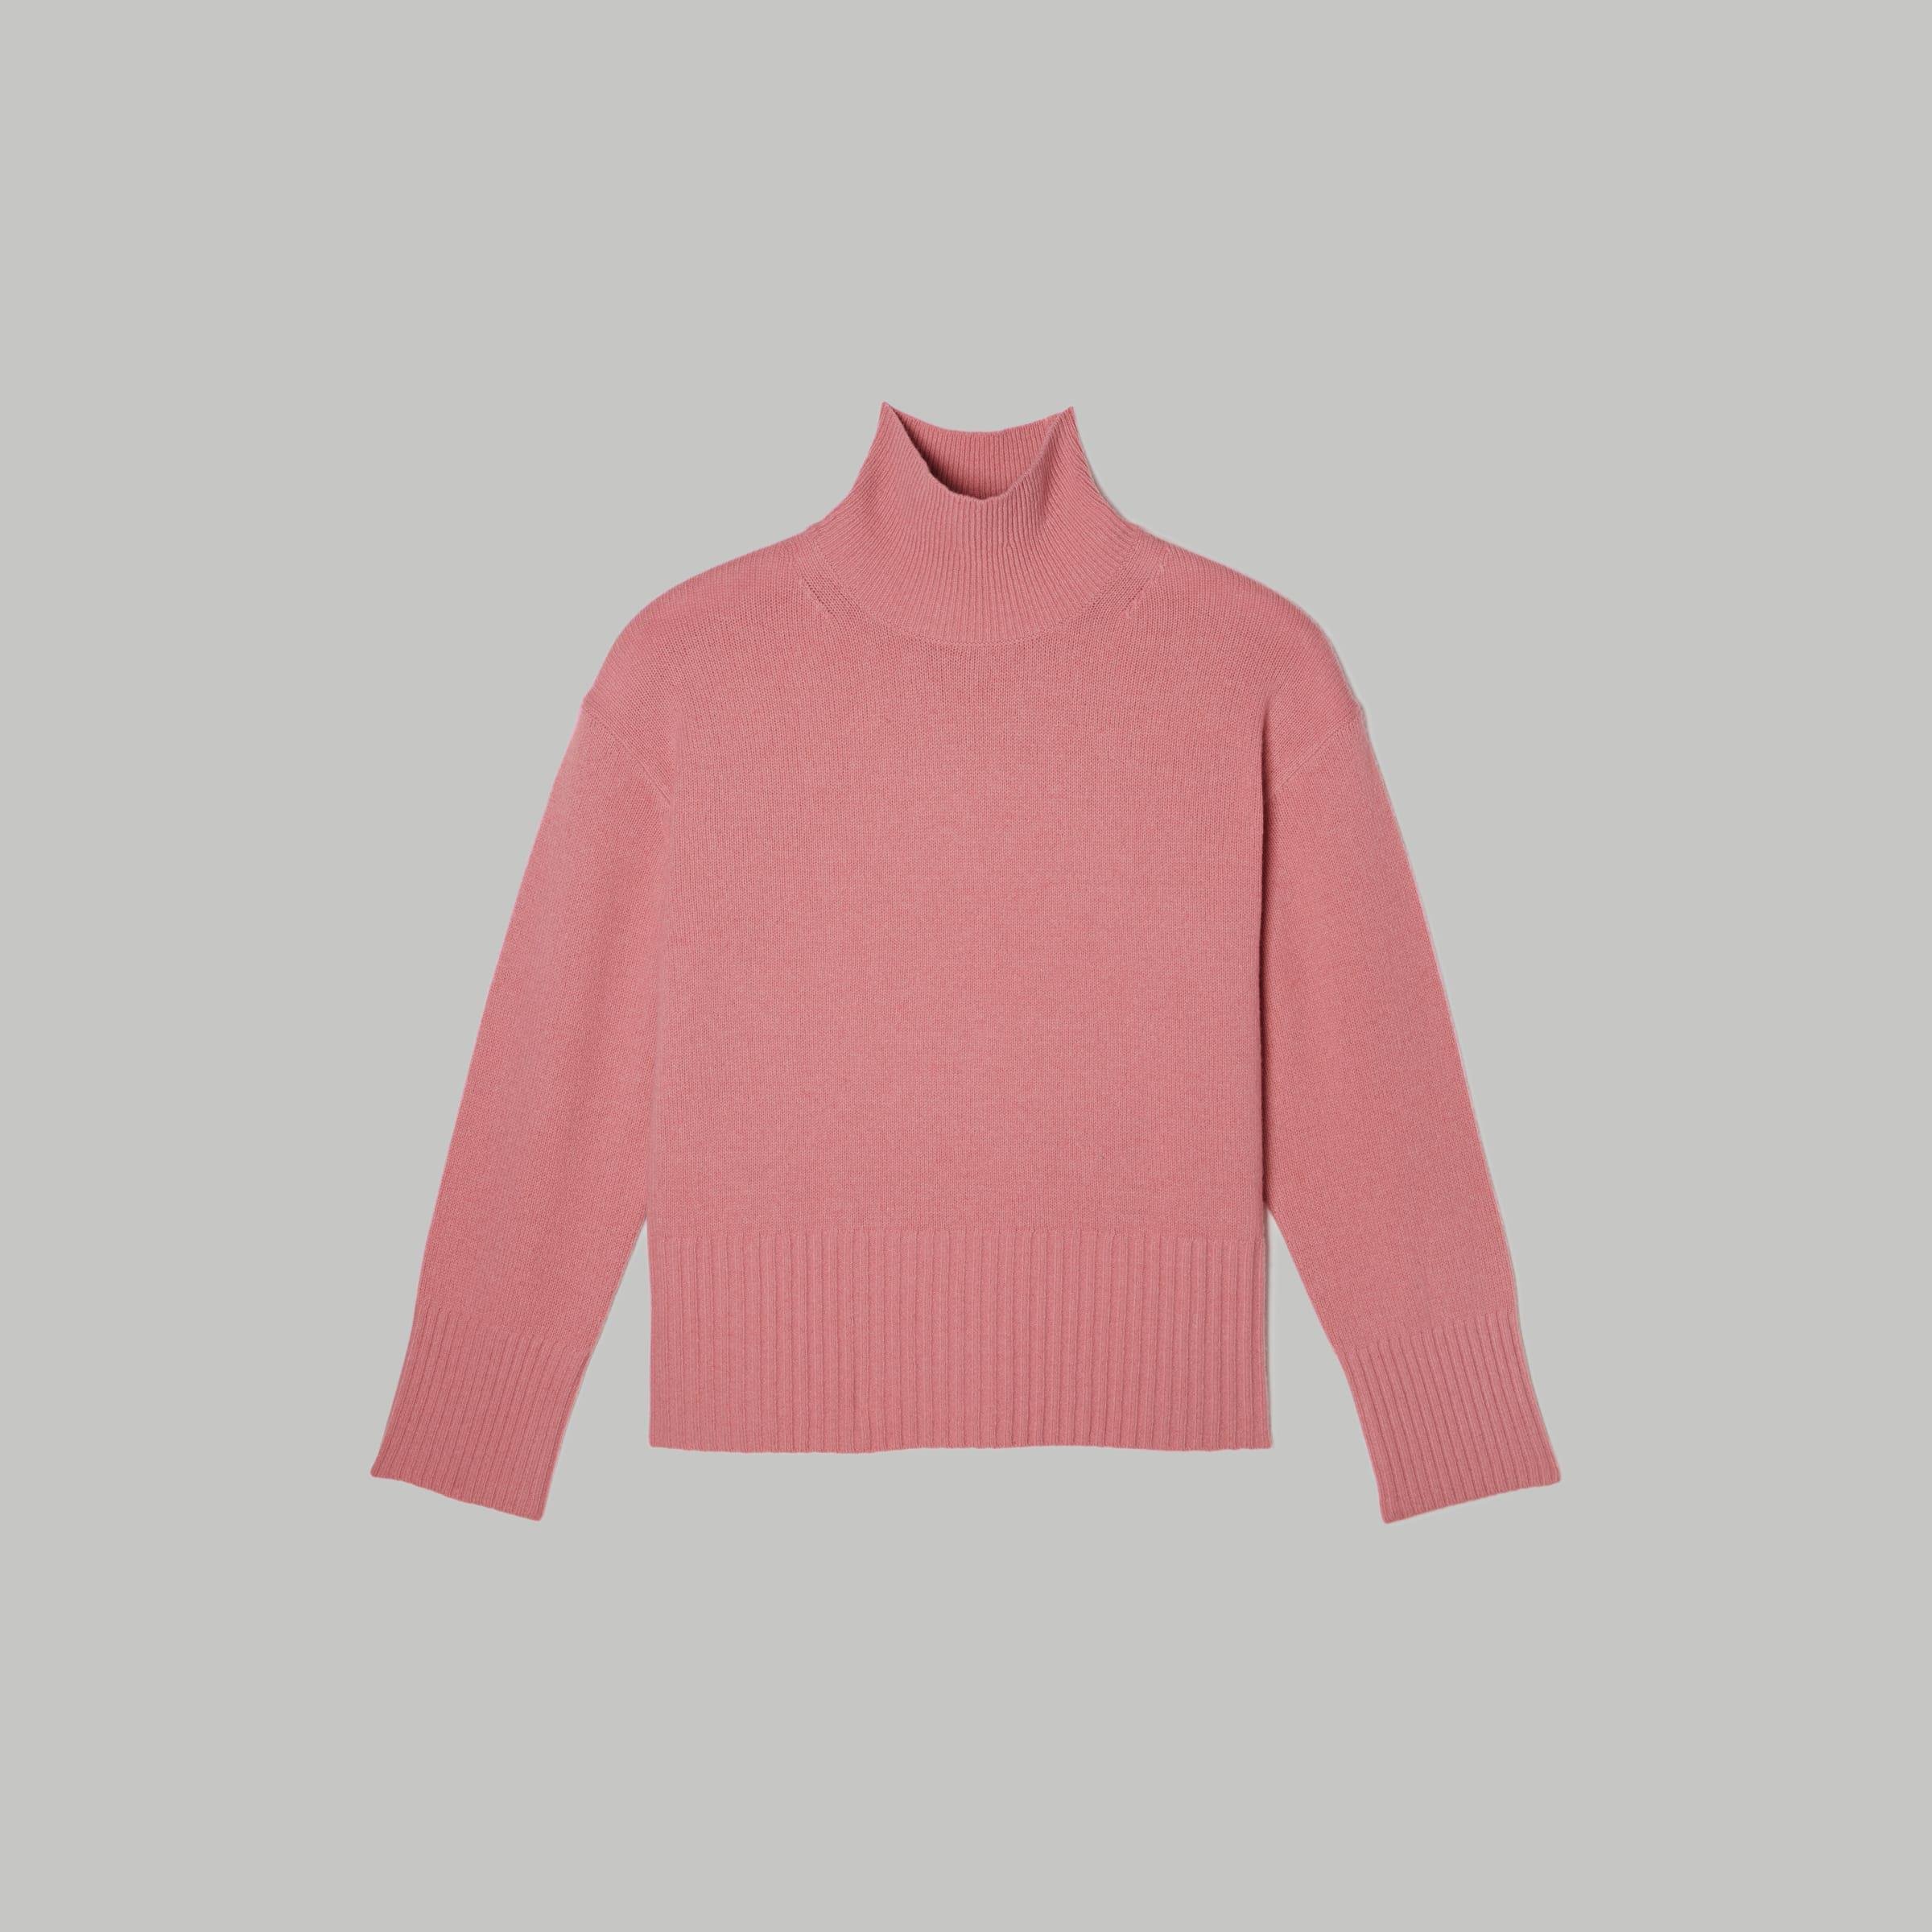 The Cashmere Oversized Turtleneck by EVERLANE